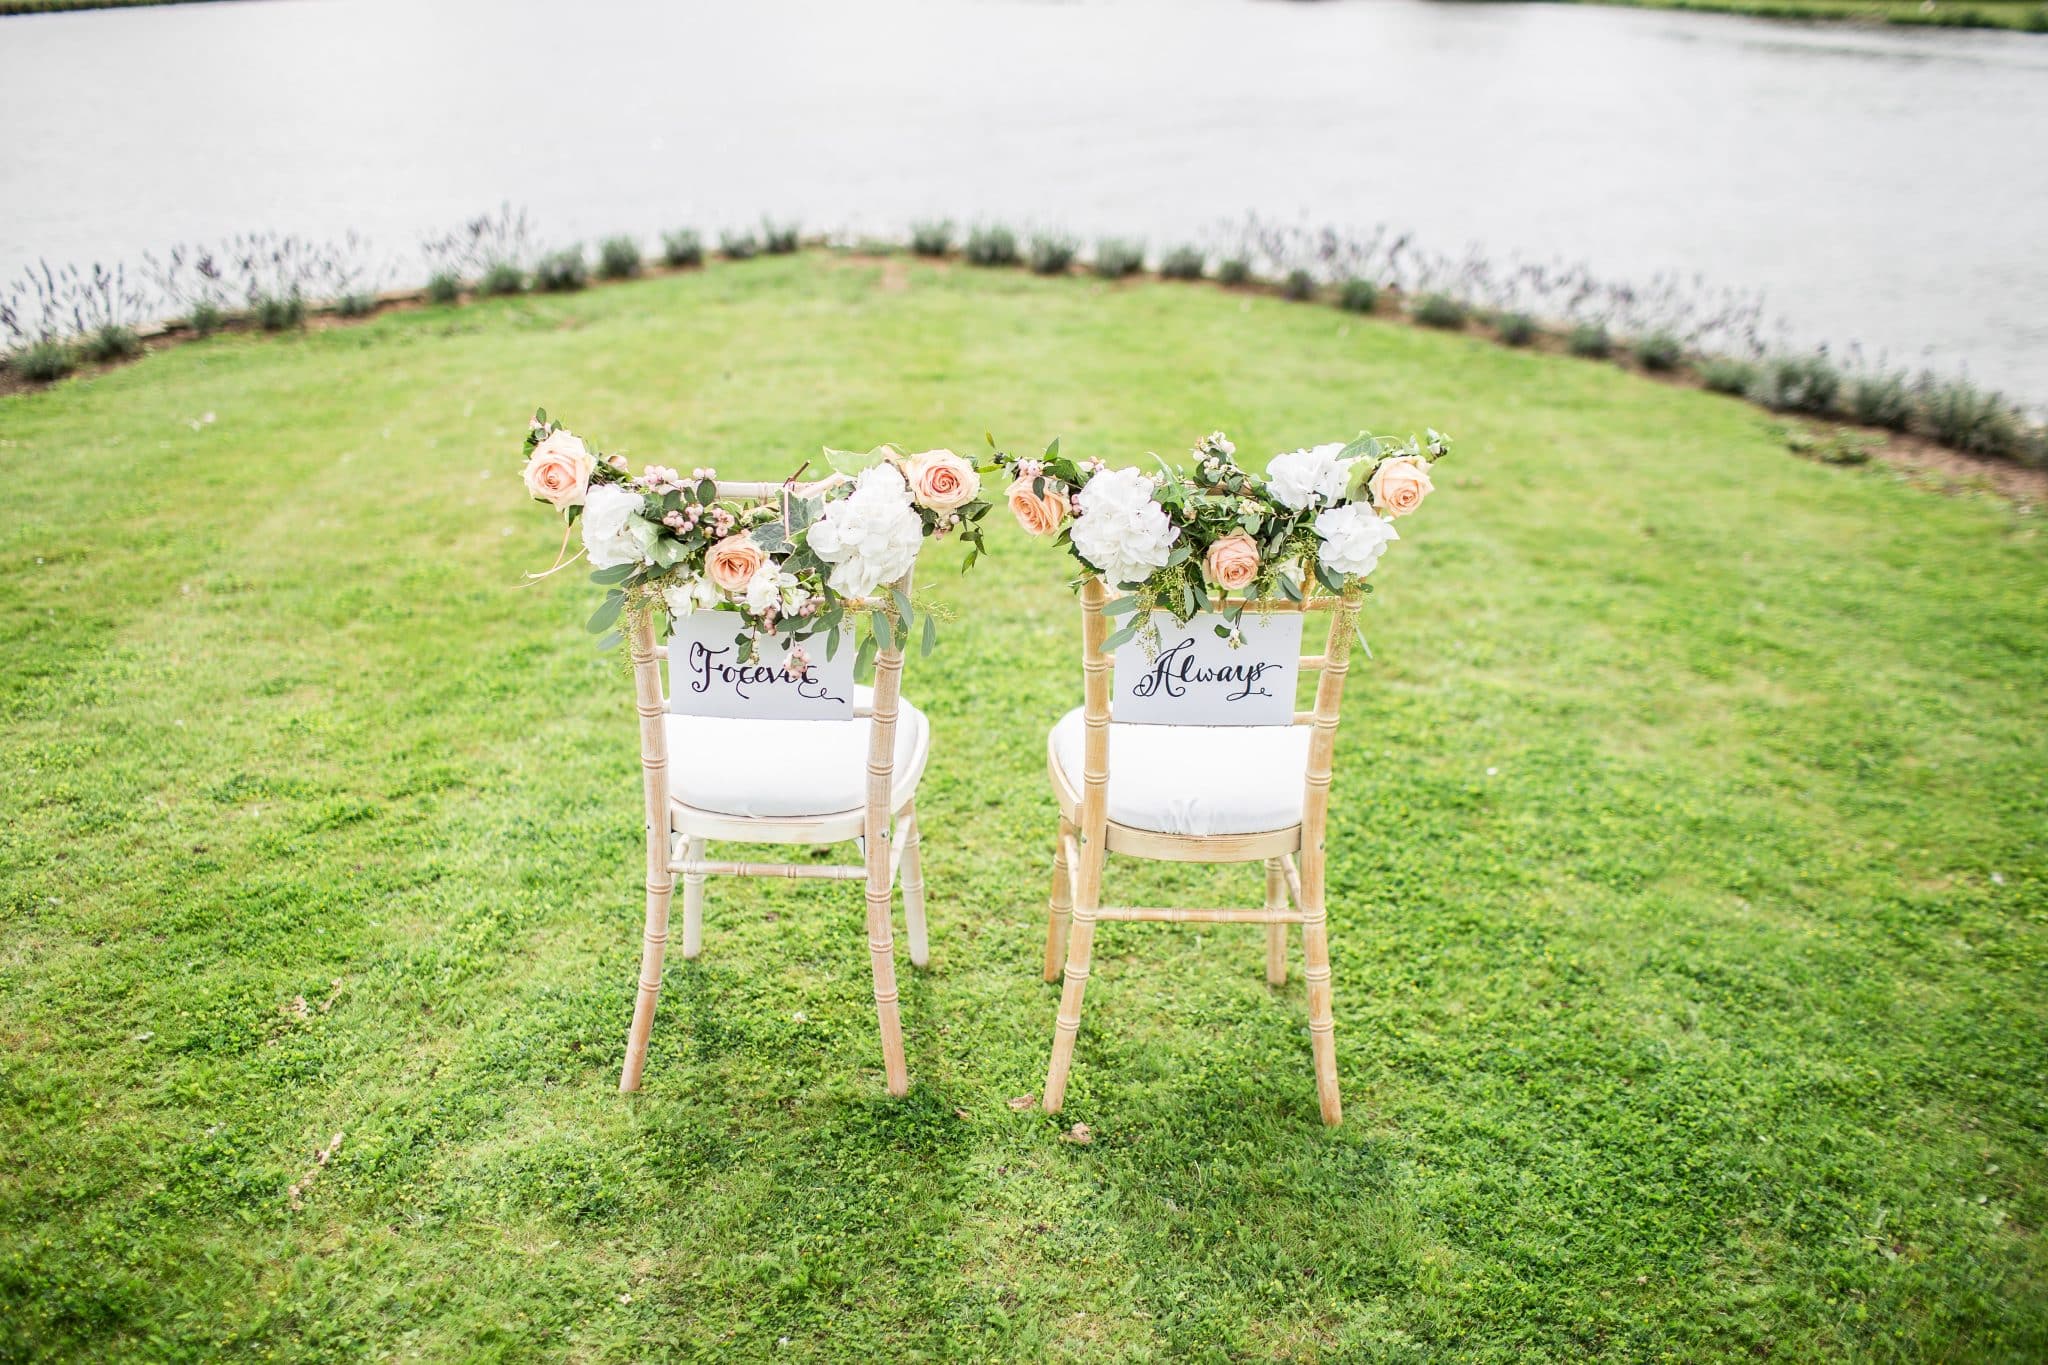 Bride and groom chairs decorated with pink and white flowers and signs reading "forever and always"